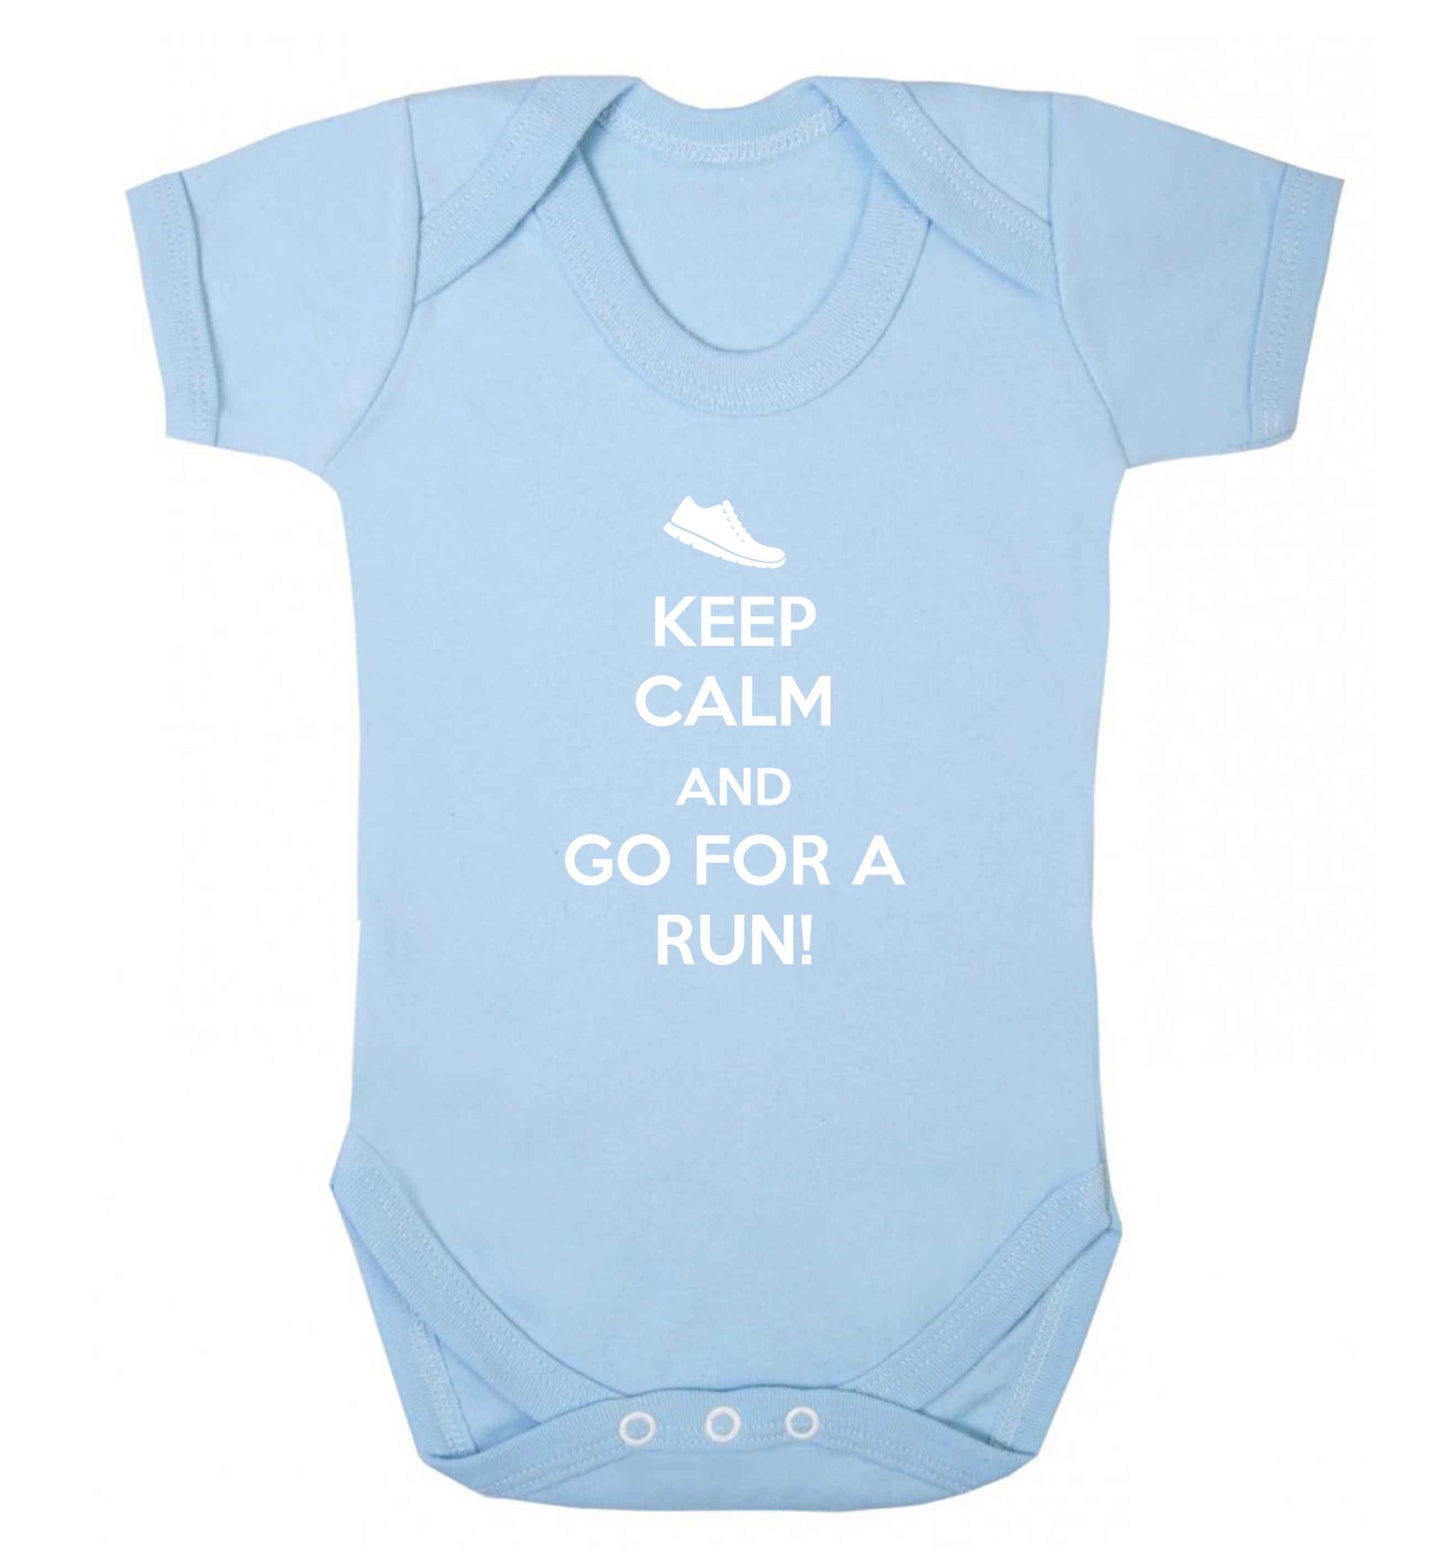 Keep calm and go for a run baby vest pale blue 18-24 months